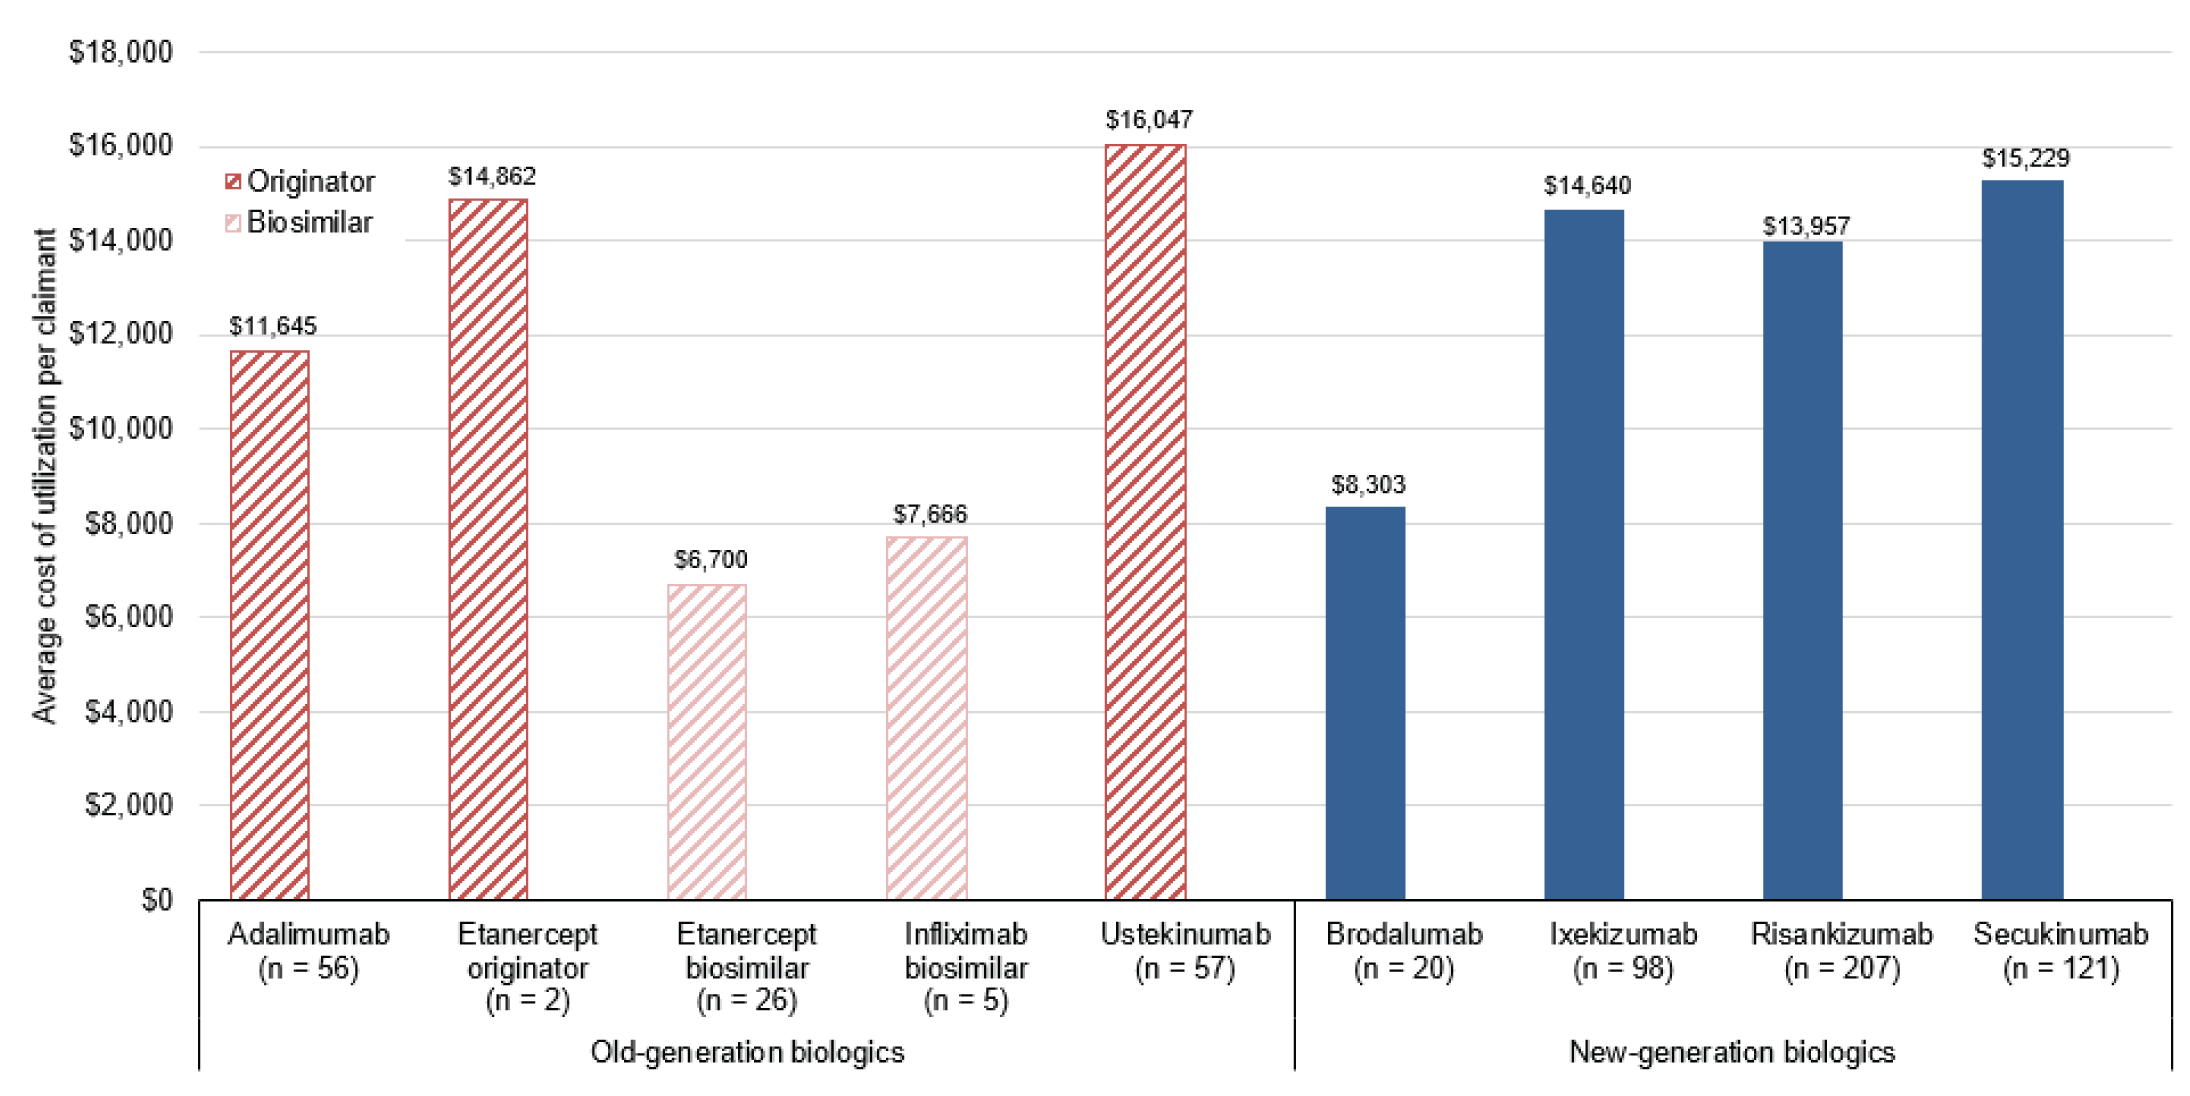 Alt text: A bar graph presenting the national average annual cost (at list price) of utilization per claimant for biologics among new claimants with plaque psoriasis. All new-generation biologics are less costly compared to the most utilized old-generation biologic, ustekinumab.